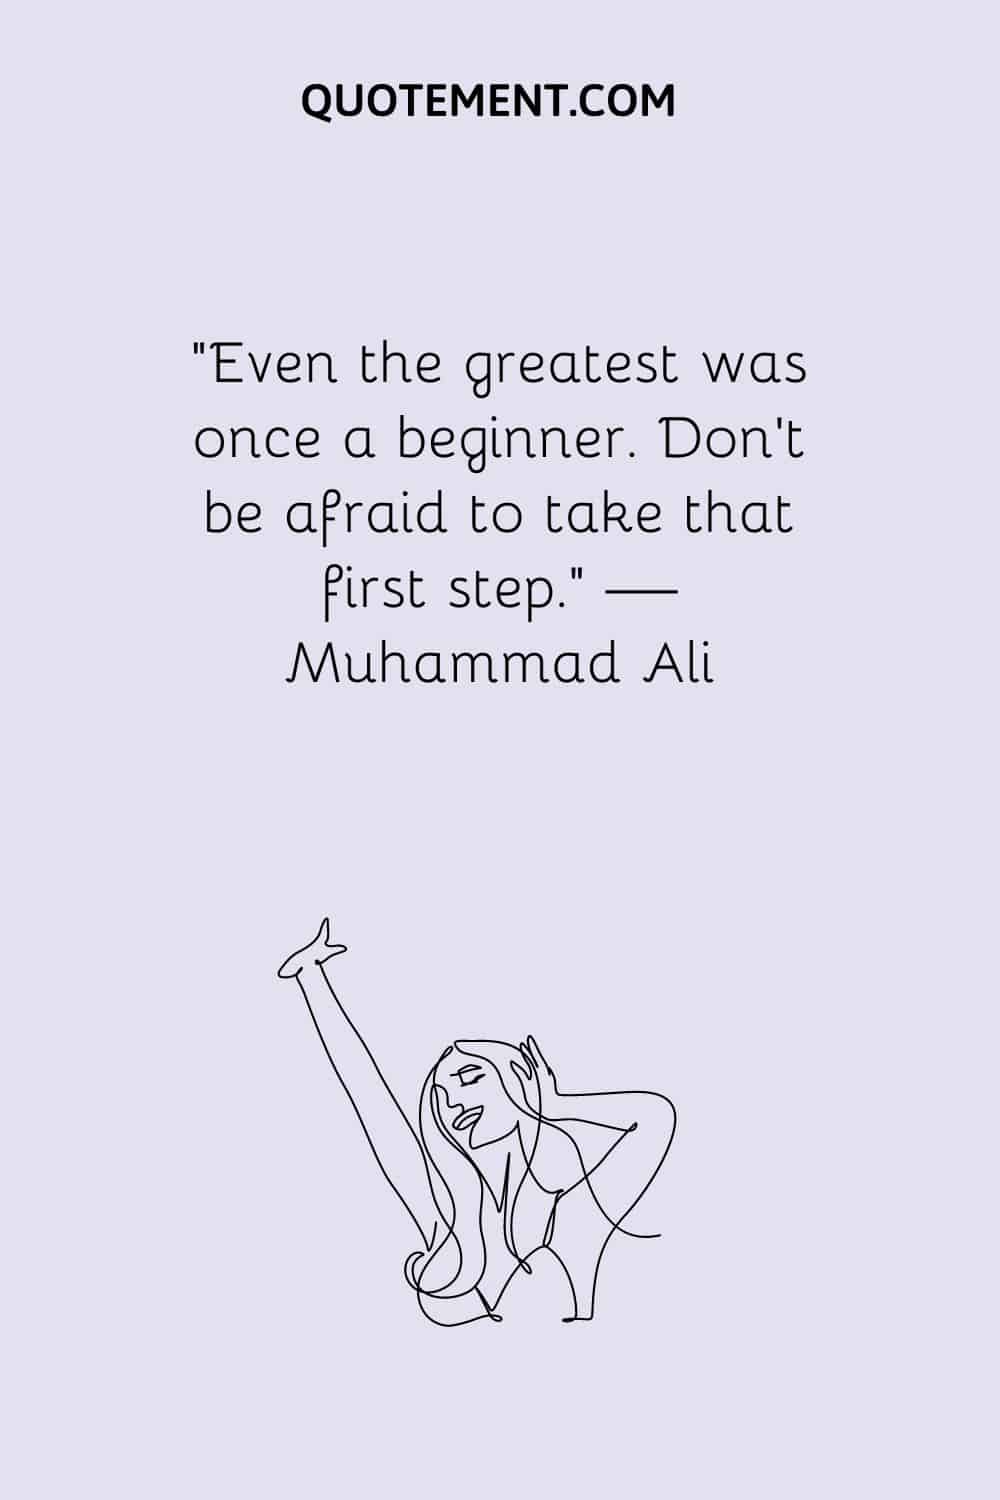 Even the greatest was once a beginner. Don’t be afraid to take that first step